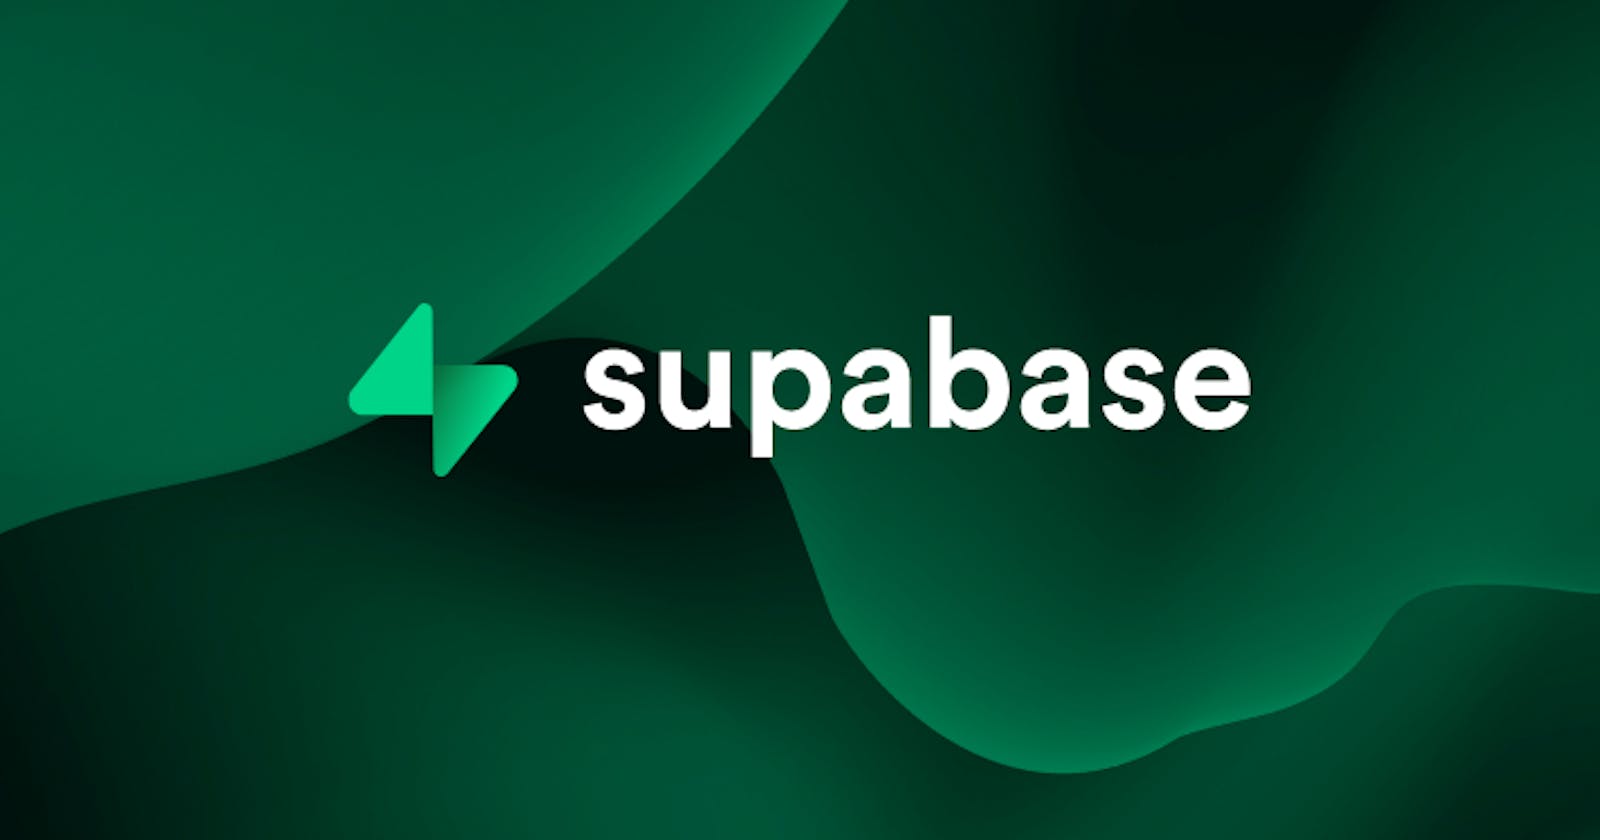 Recover your password with Supabase